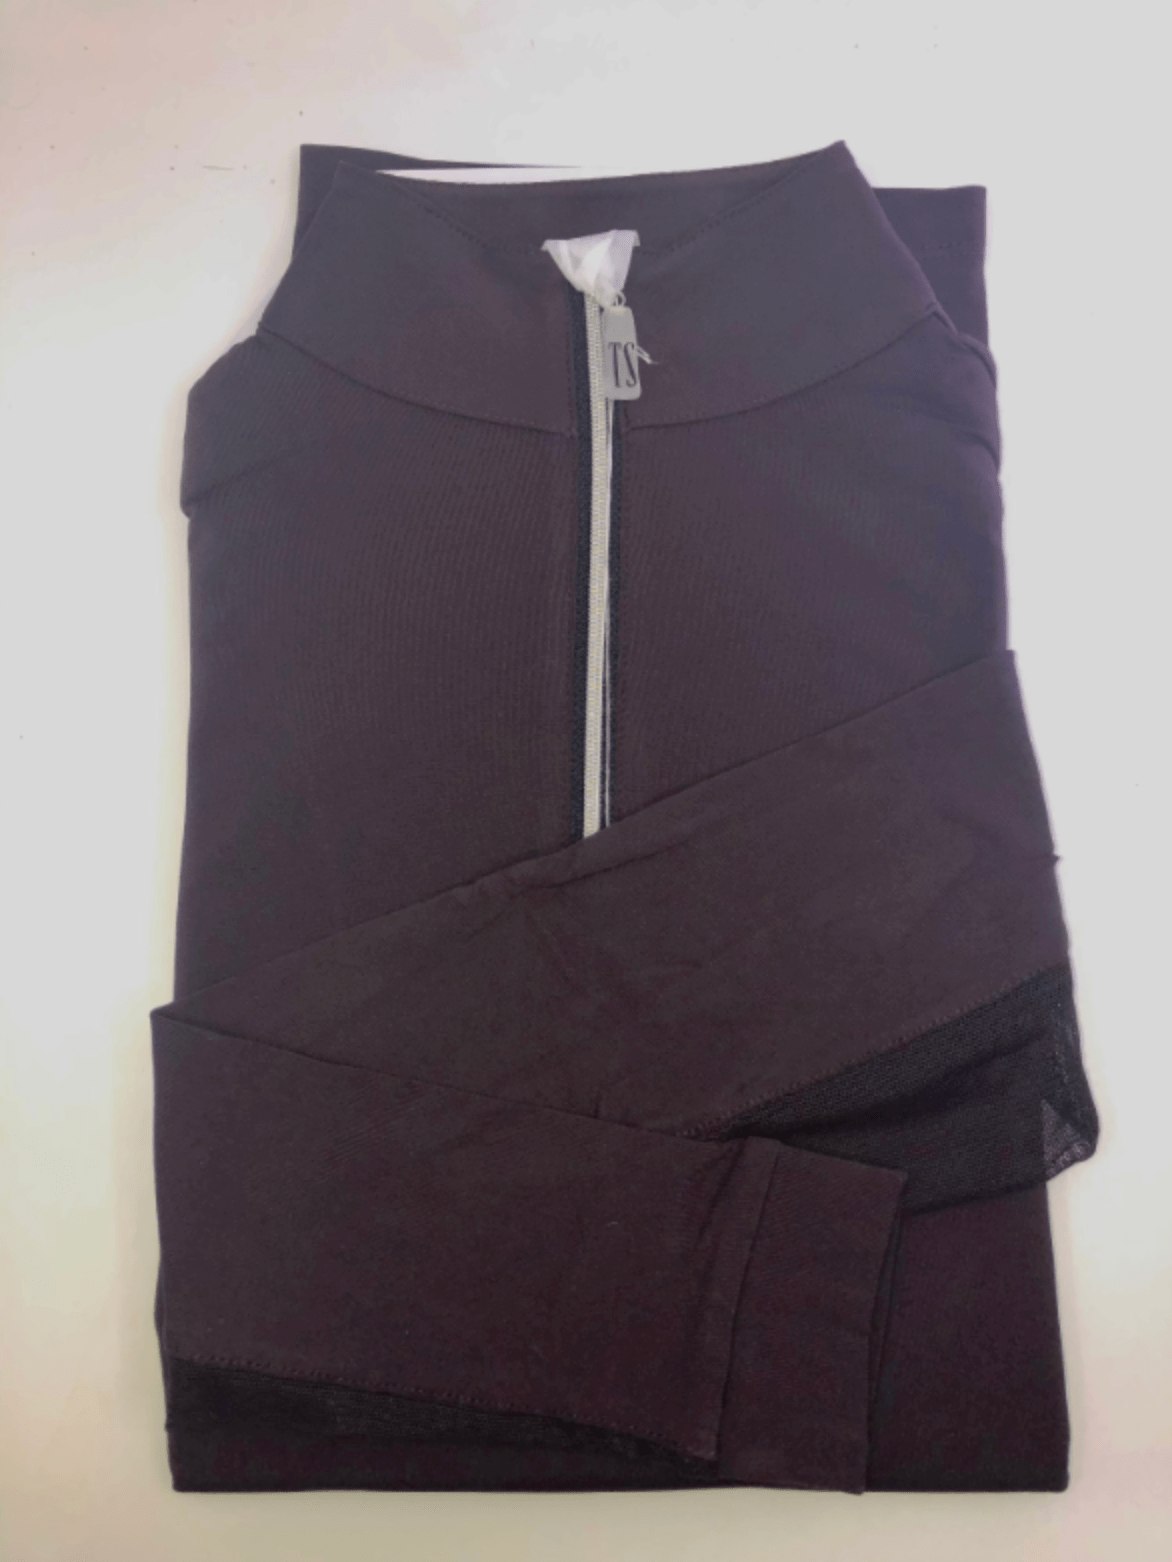 Tailored Sportsman Sun Shirt Boysenberry/Black silver Tailored Sportsman Sun Shirt Long Sleeve Large equestrian team apparel online tack store mobile tack store custom farm apparel custom show stable clothing equestrian lifestyle horse show clothing riding clothes horses equestrian tack store